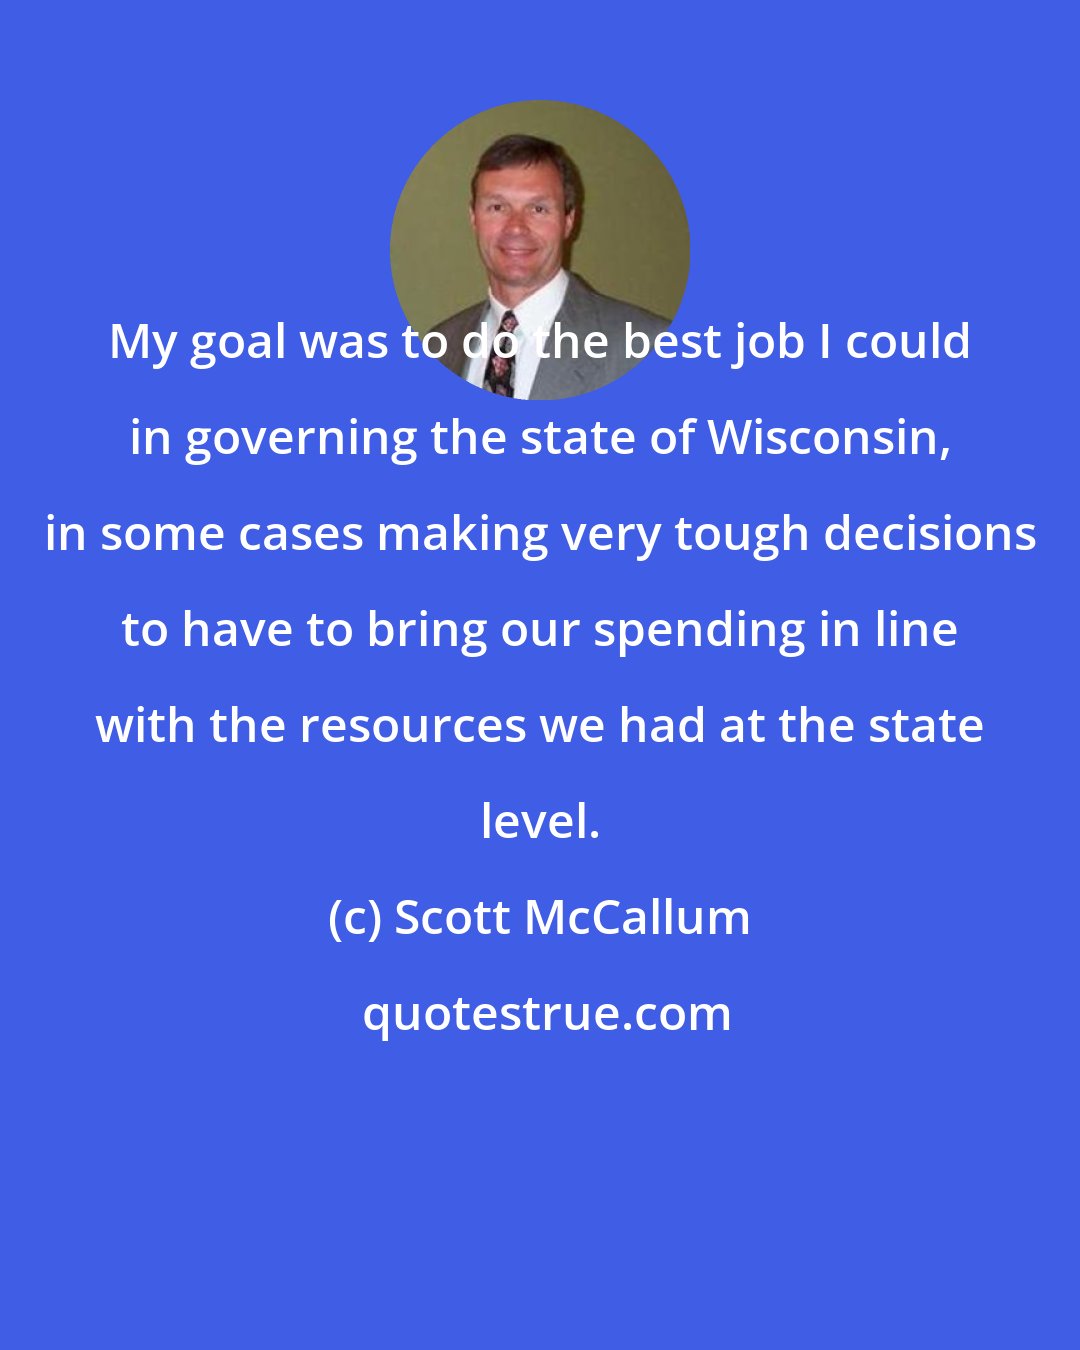 Scott McCallum: My goal was to do the best job I could in governing the state of Wisconsin, in some cases making very tough decisions to have to bring our spending in line with the resources we had at the state level.